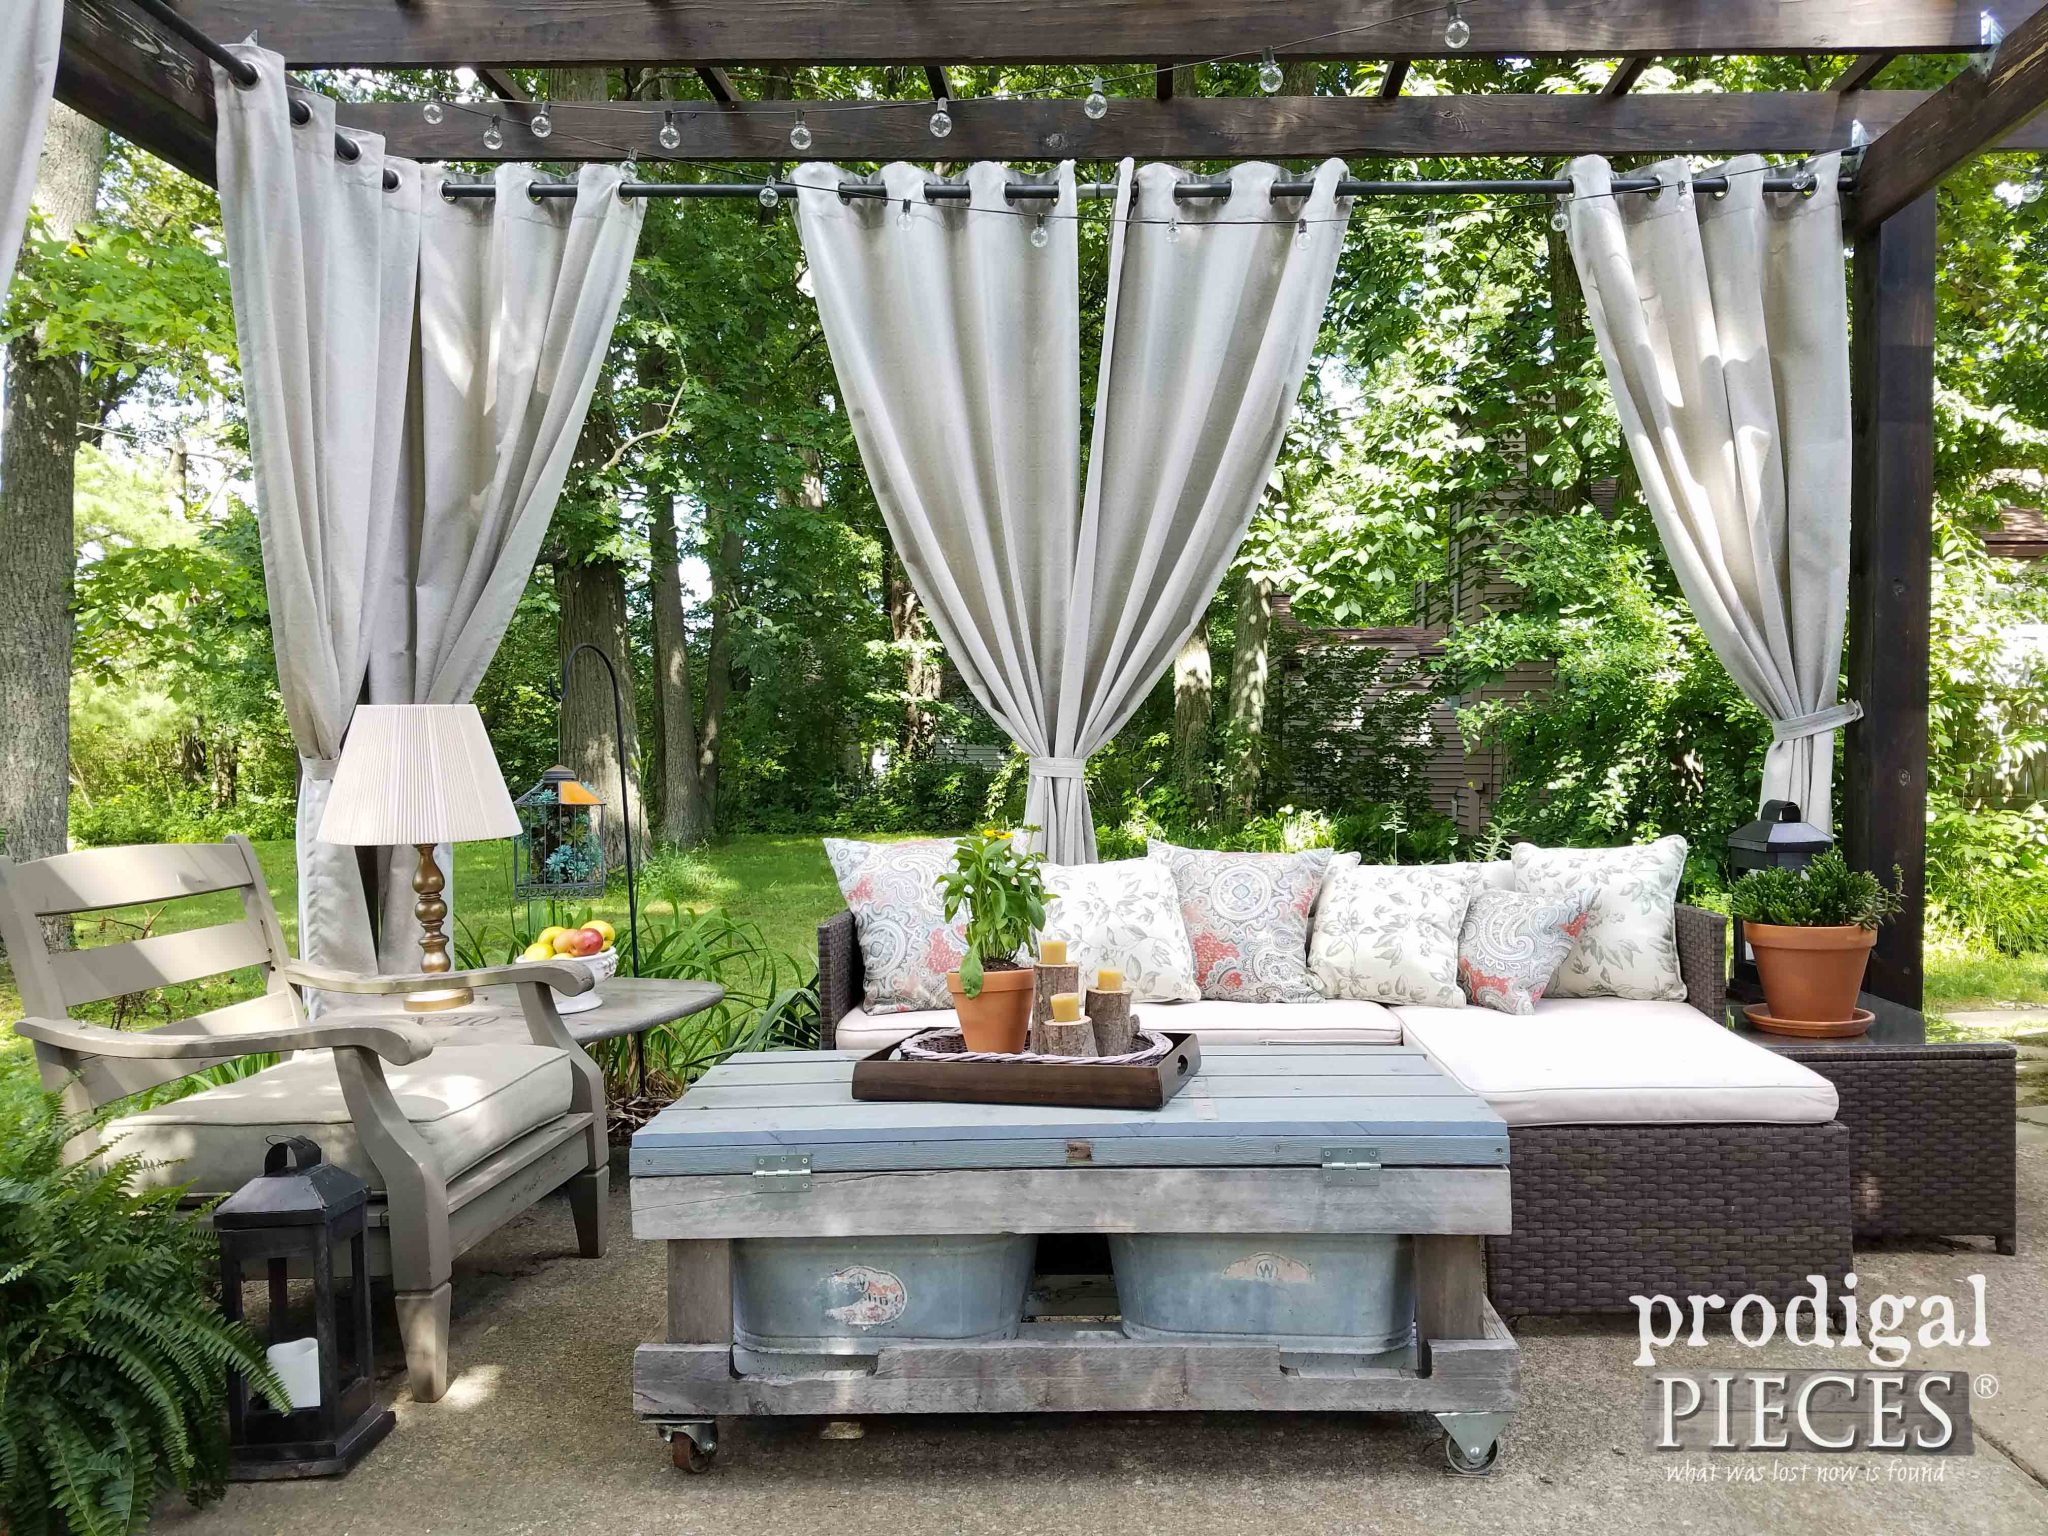 Patio Design with Repurposed and Reclaimed Materials by Prodigal Pieces | prodigalpieces.com